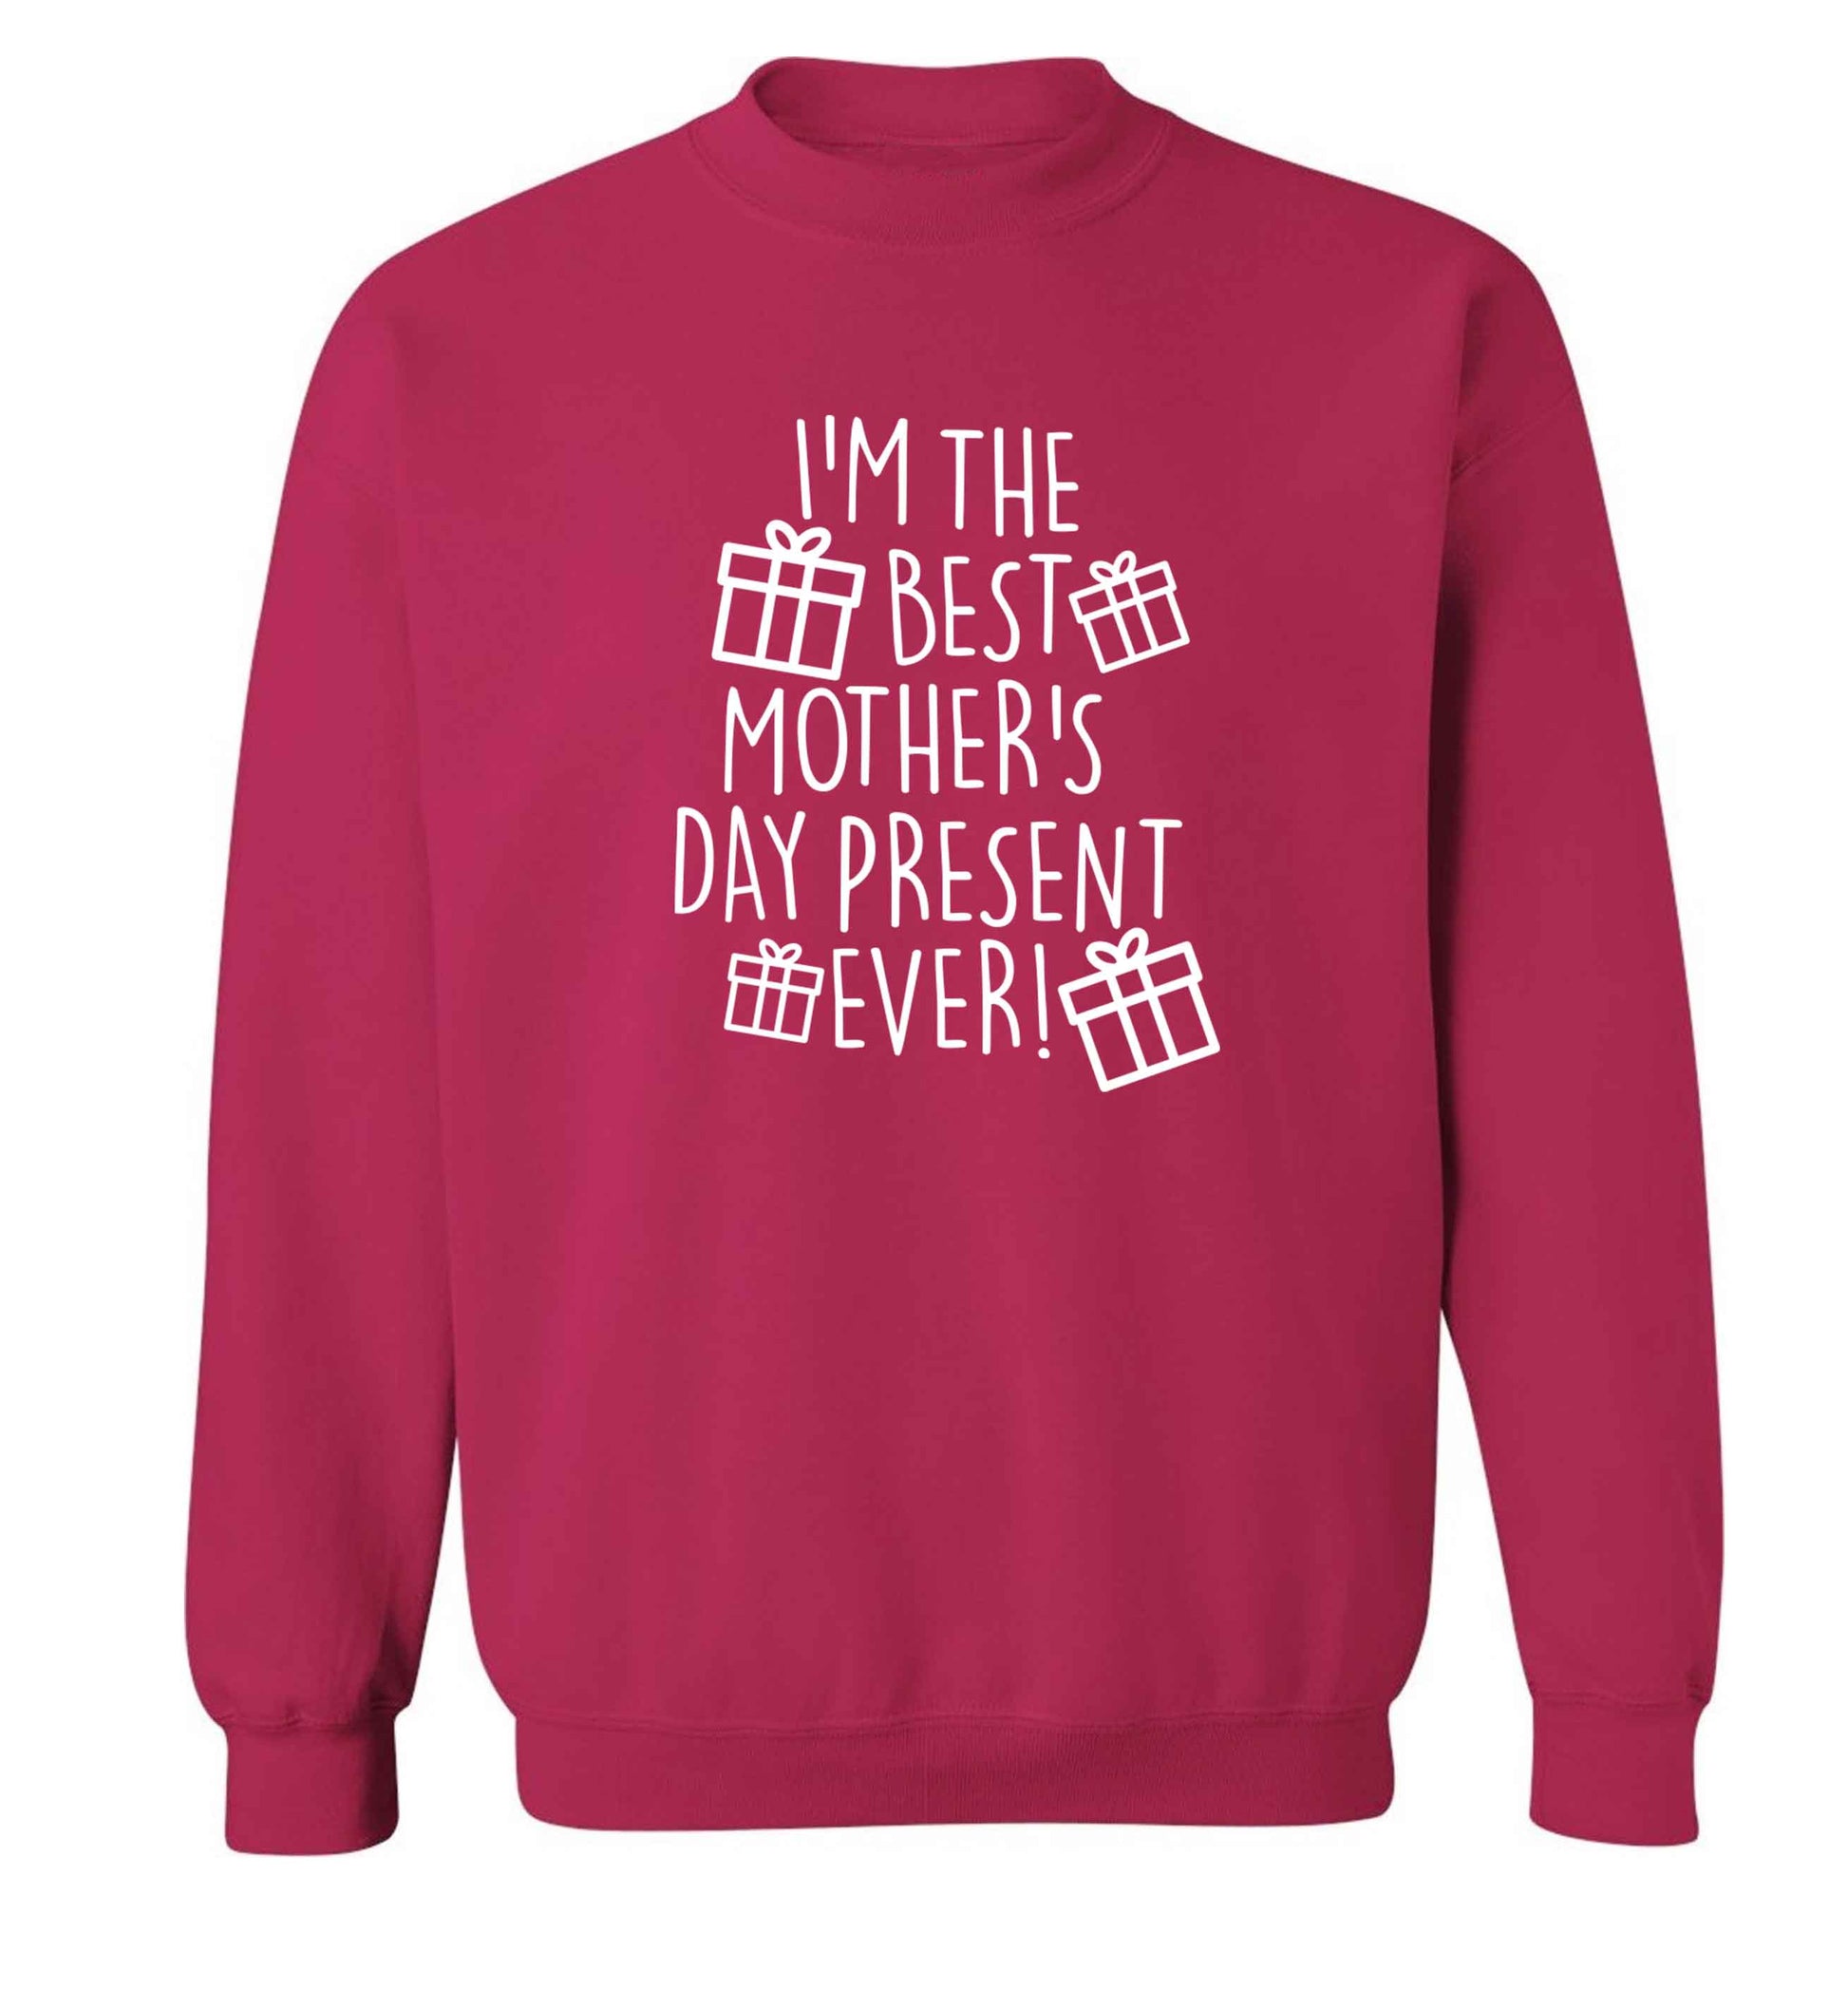 I'm the best mother's day present ever! adult's unisex pink sweater 2XL